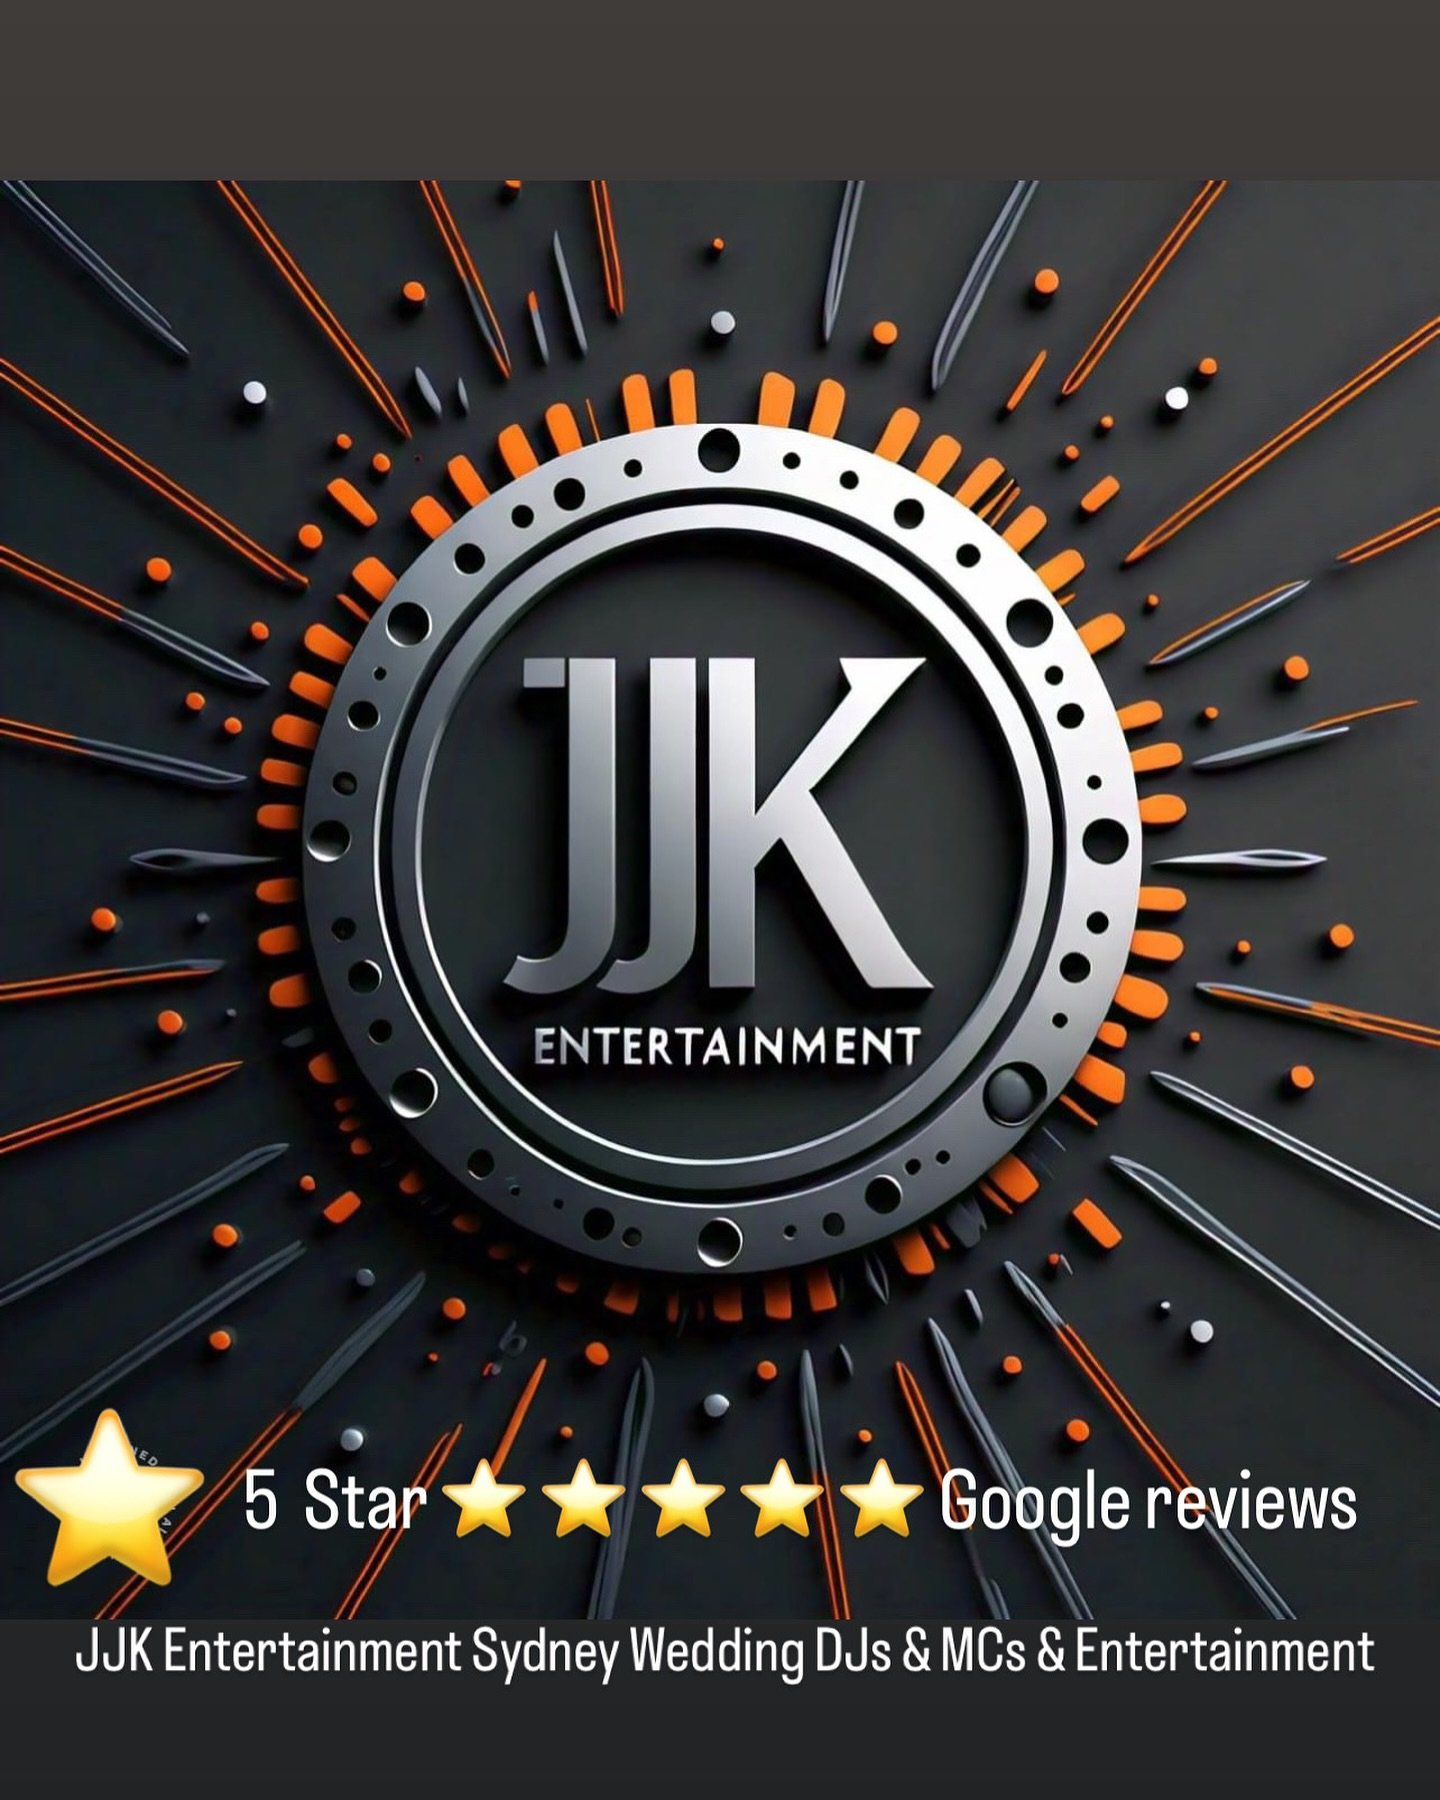 JJK Entertainment One Shop that does the lot  5 star Google reviews.  We have Sydney Wedding DJs and Sydney MCs available for your next event visit our website for more information www.ilkentertainment.com
 
 #weddingmusic #sydneyweddingdj #musicwedd